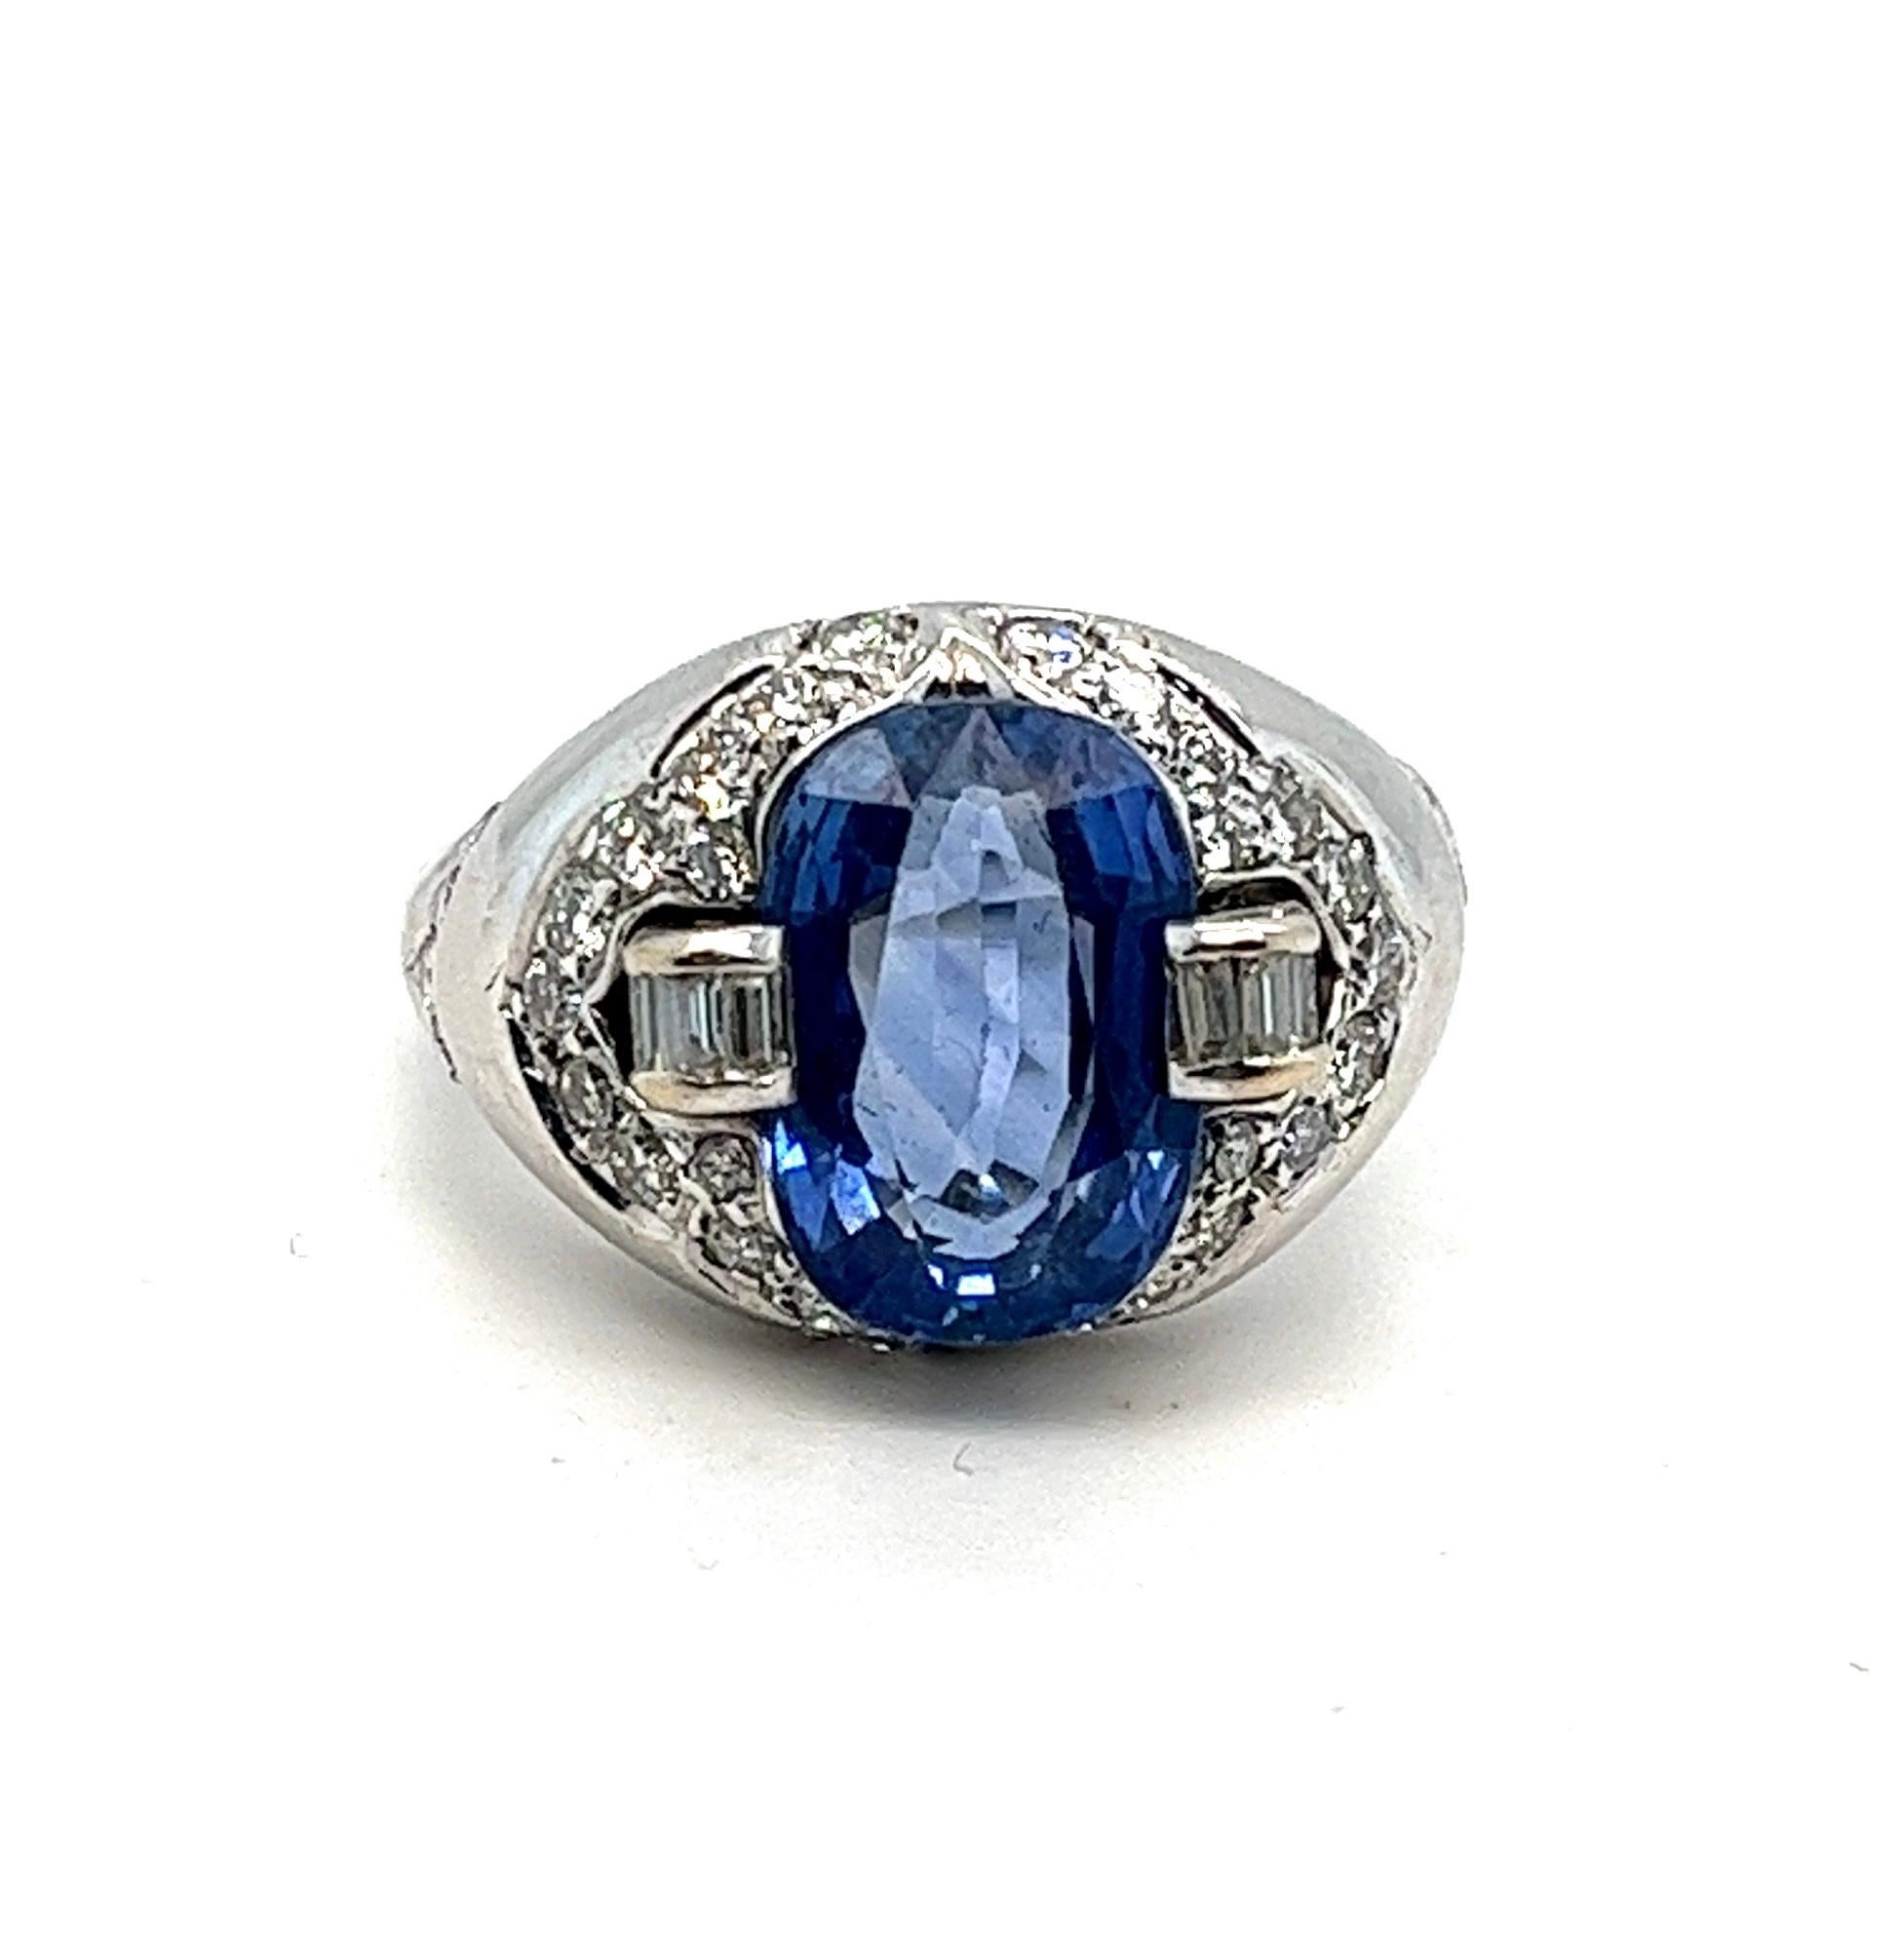 
Indulge in the allure of this captivating 18kt white gold cocktail ring, featuring a remarkable center piece heated natural blue sapphire weighing approximately 4 carats from the renowned mines of Ceylon. The mesmerizing blue hue of the sapphire is